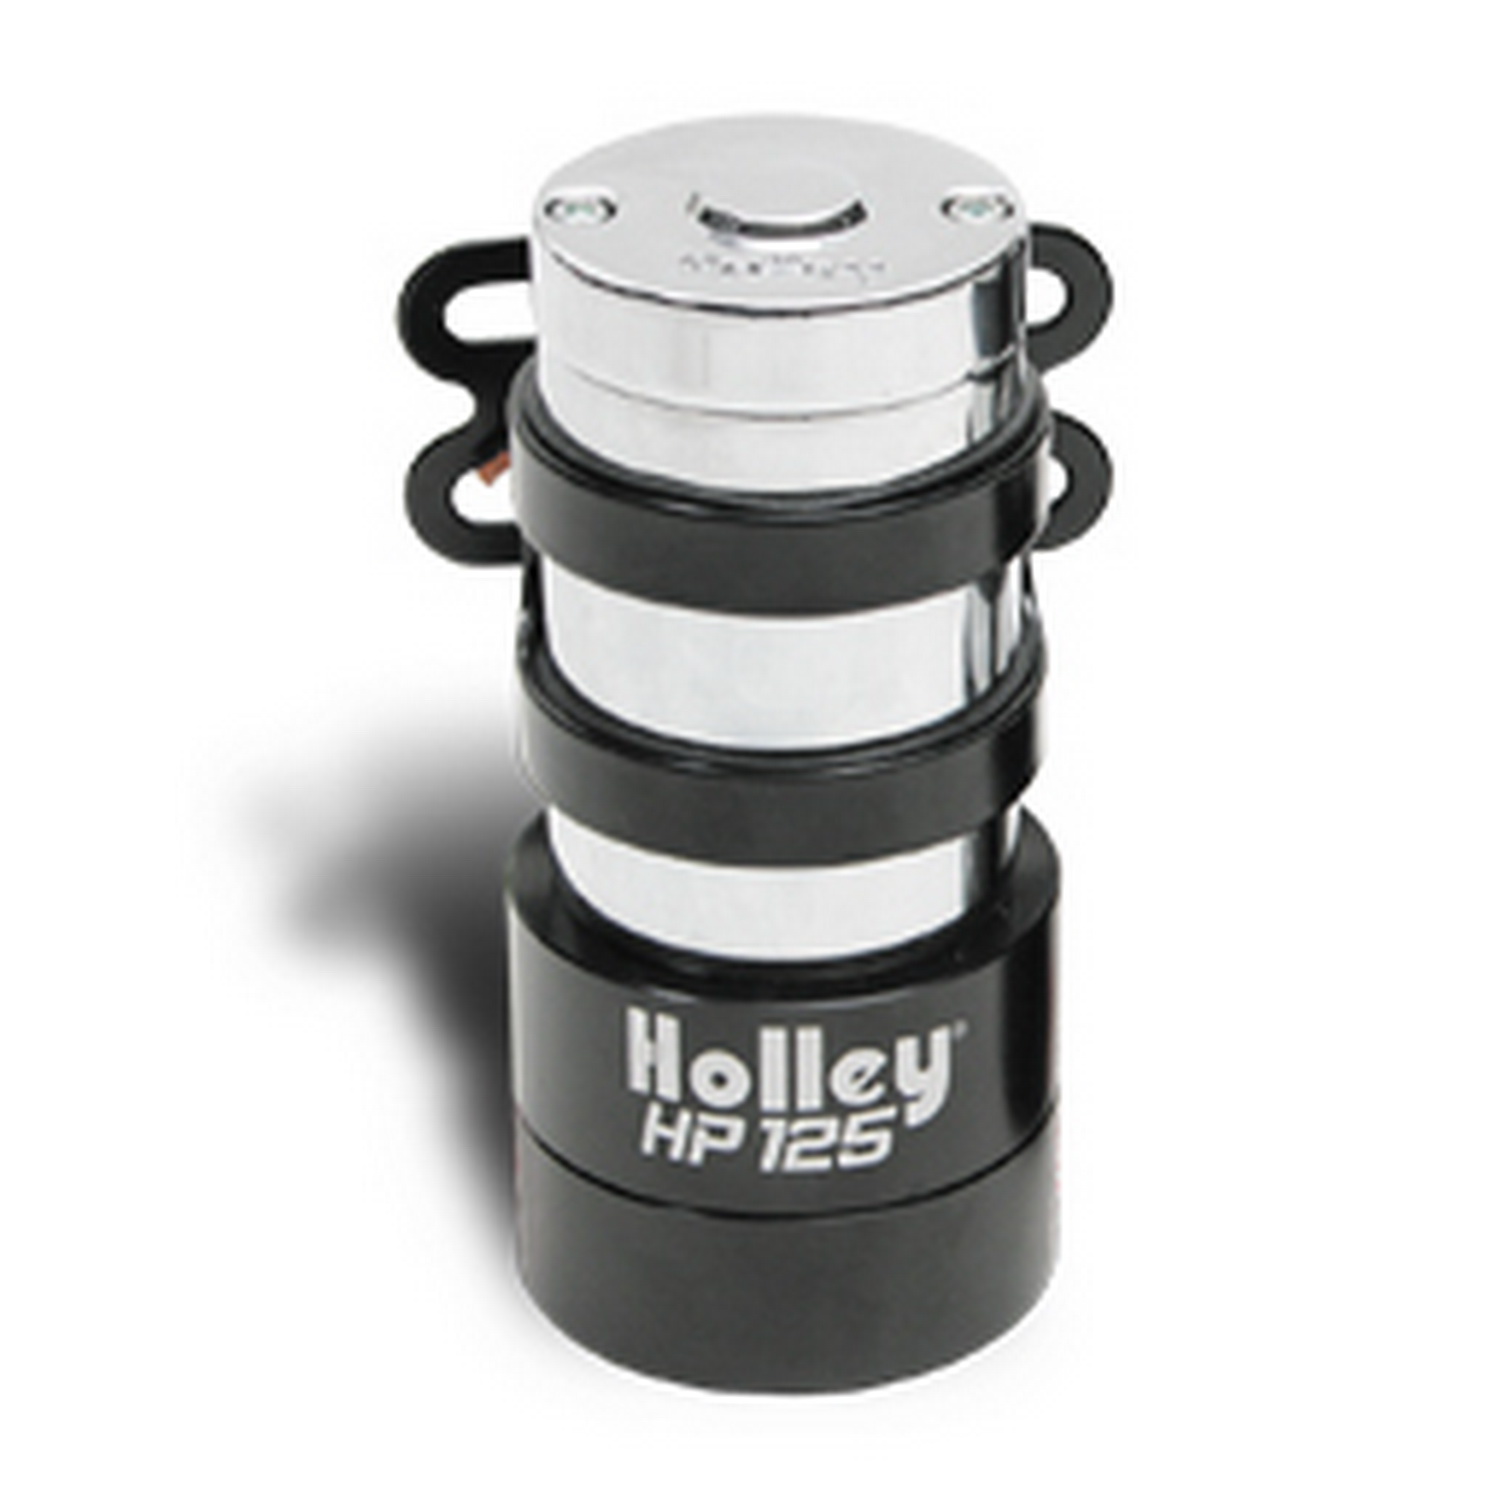 Holley Performance Holley Performance 12-125 HP Fuel Pump